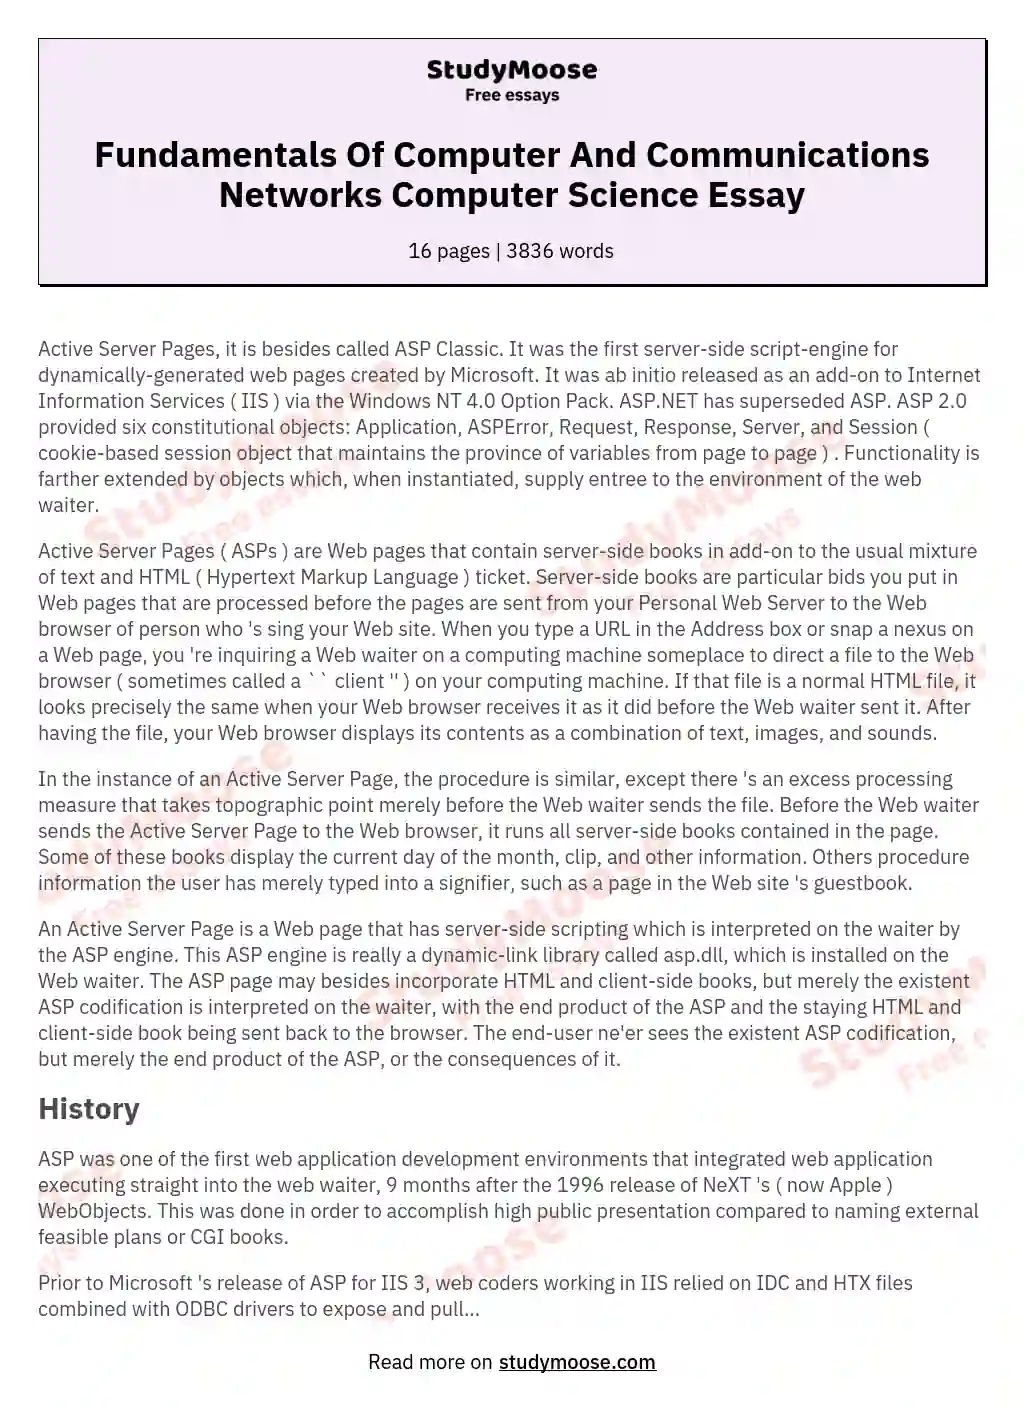 Fundamentals Of Computer And Communications Networks Computer Science Essay essay